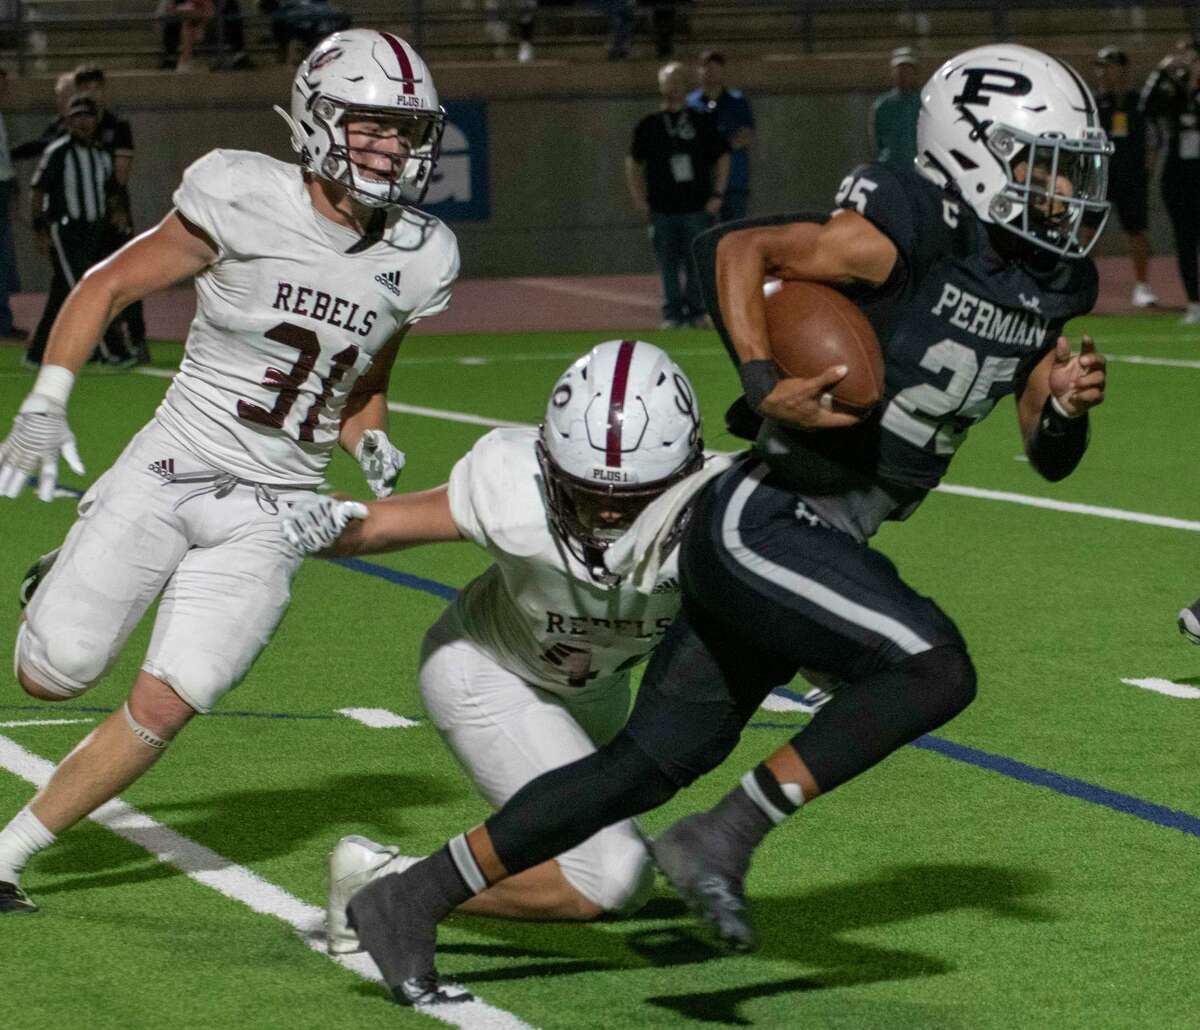 Permian quarterback Rodney Hall is chased out of the pocket by Trace Low and a diving tackle by Esus Robledo 09/14/2022 at Ratliff Stadium. Tim Fischer/Reporter-Telegram